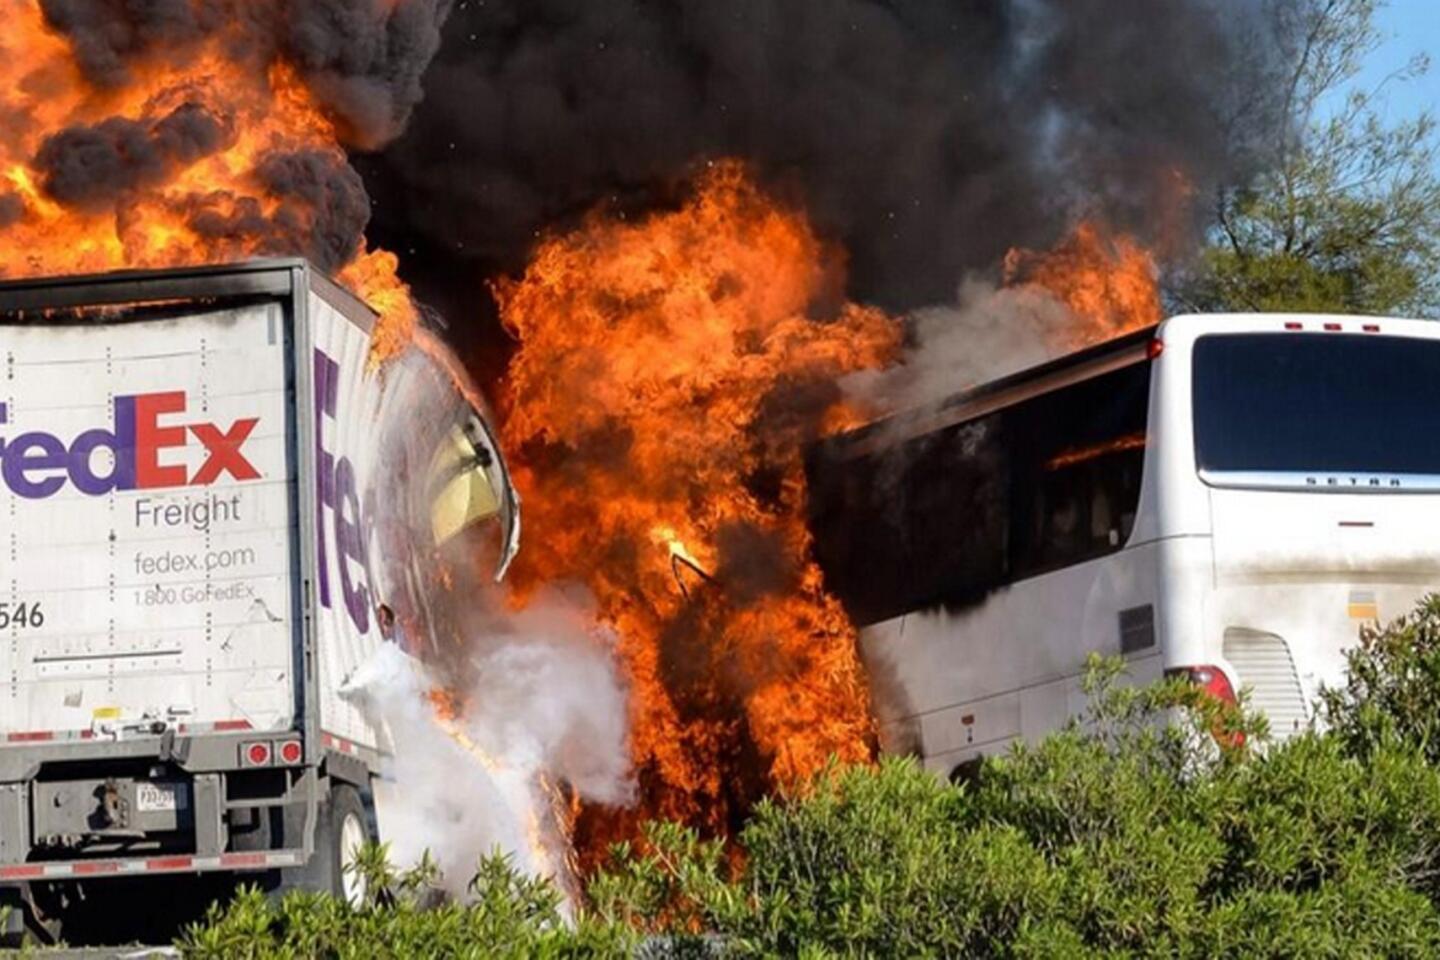 Flames engulf the vehicles just after a head-on crash near Orland, Calif., involving a FedEx truck a